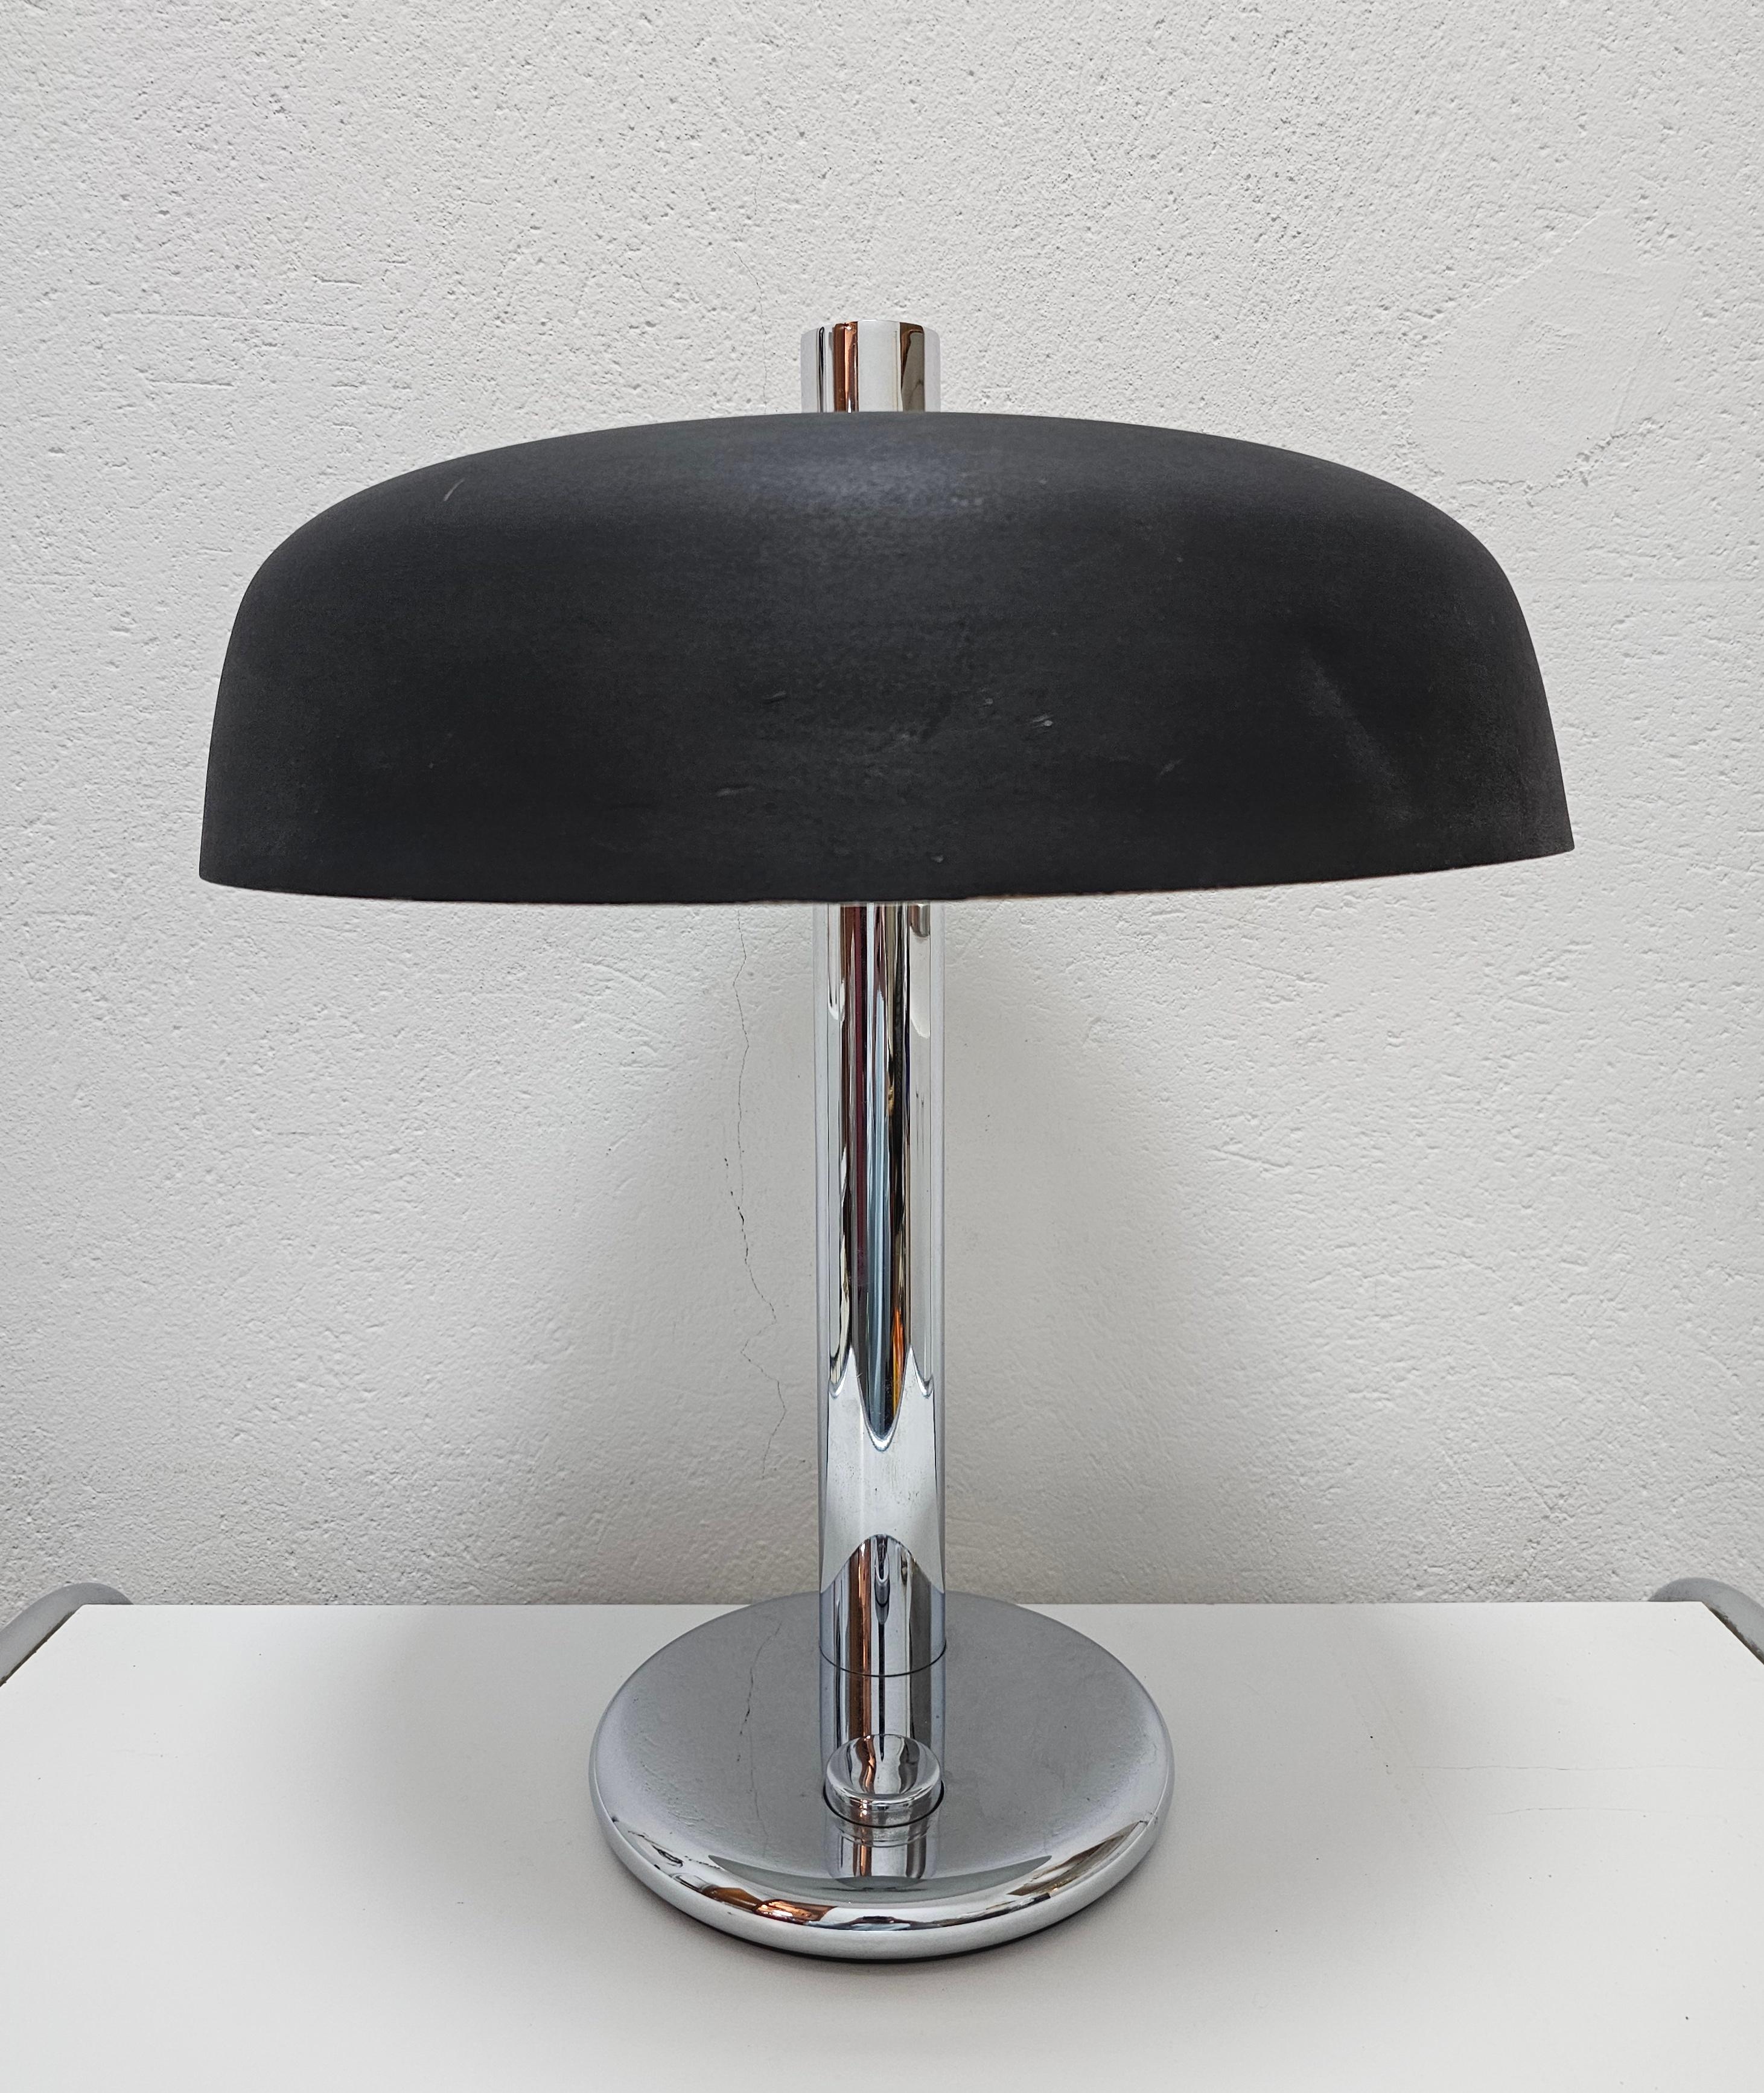 Bauhaus Style Table Lamp Model 7603 designed by Heinz Pfaender for Hillebrand  In Good Condition For Sale In Beograd, RS